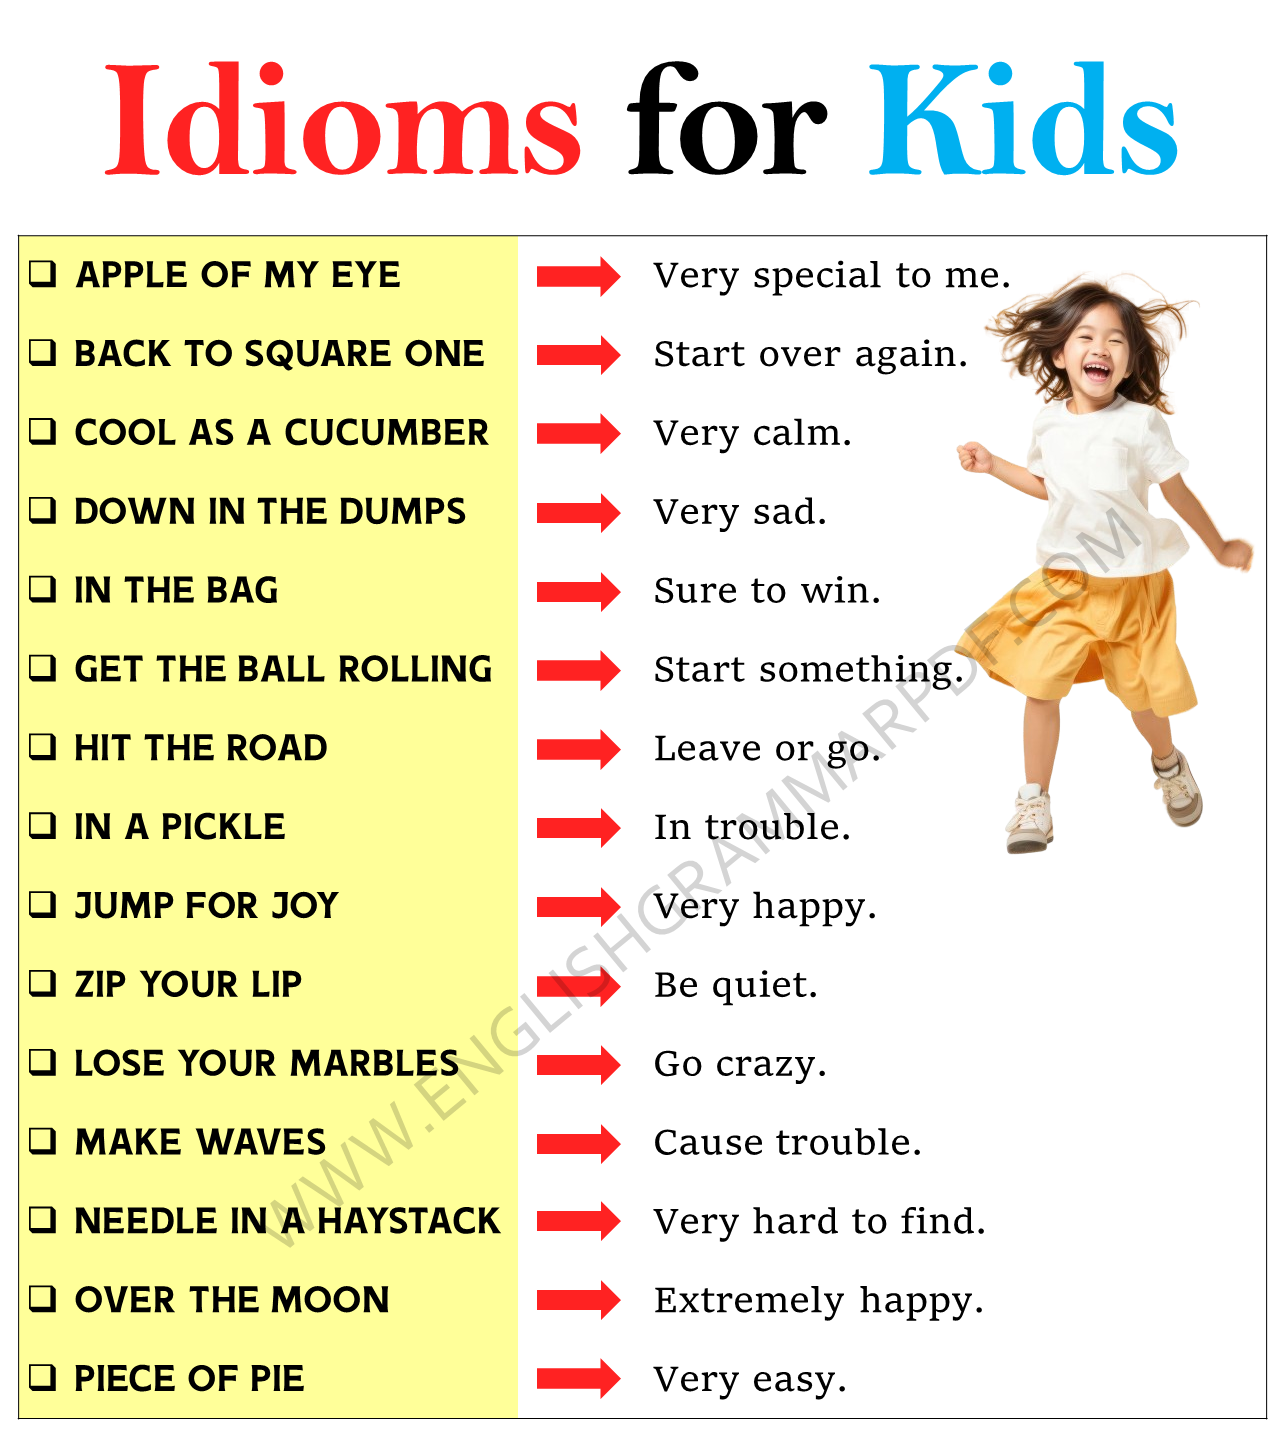 Idioms for Kids